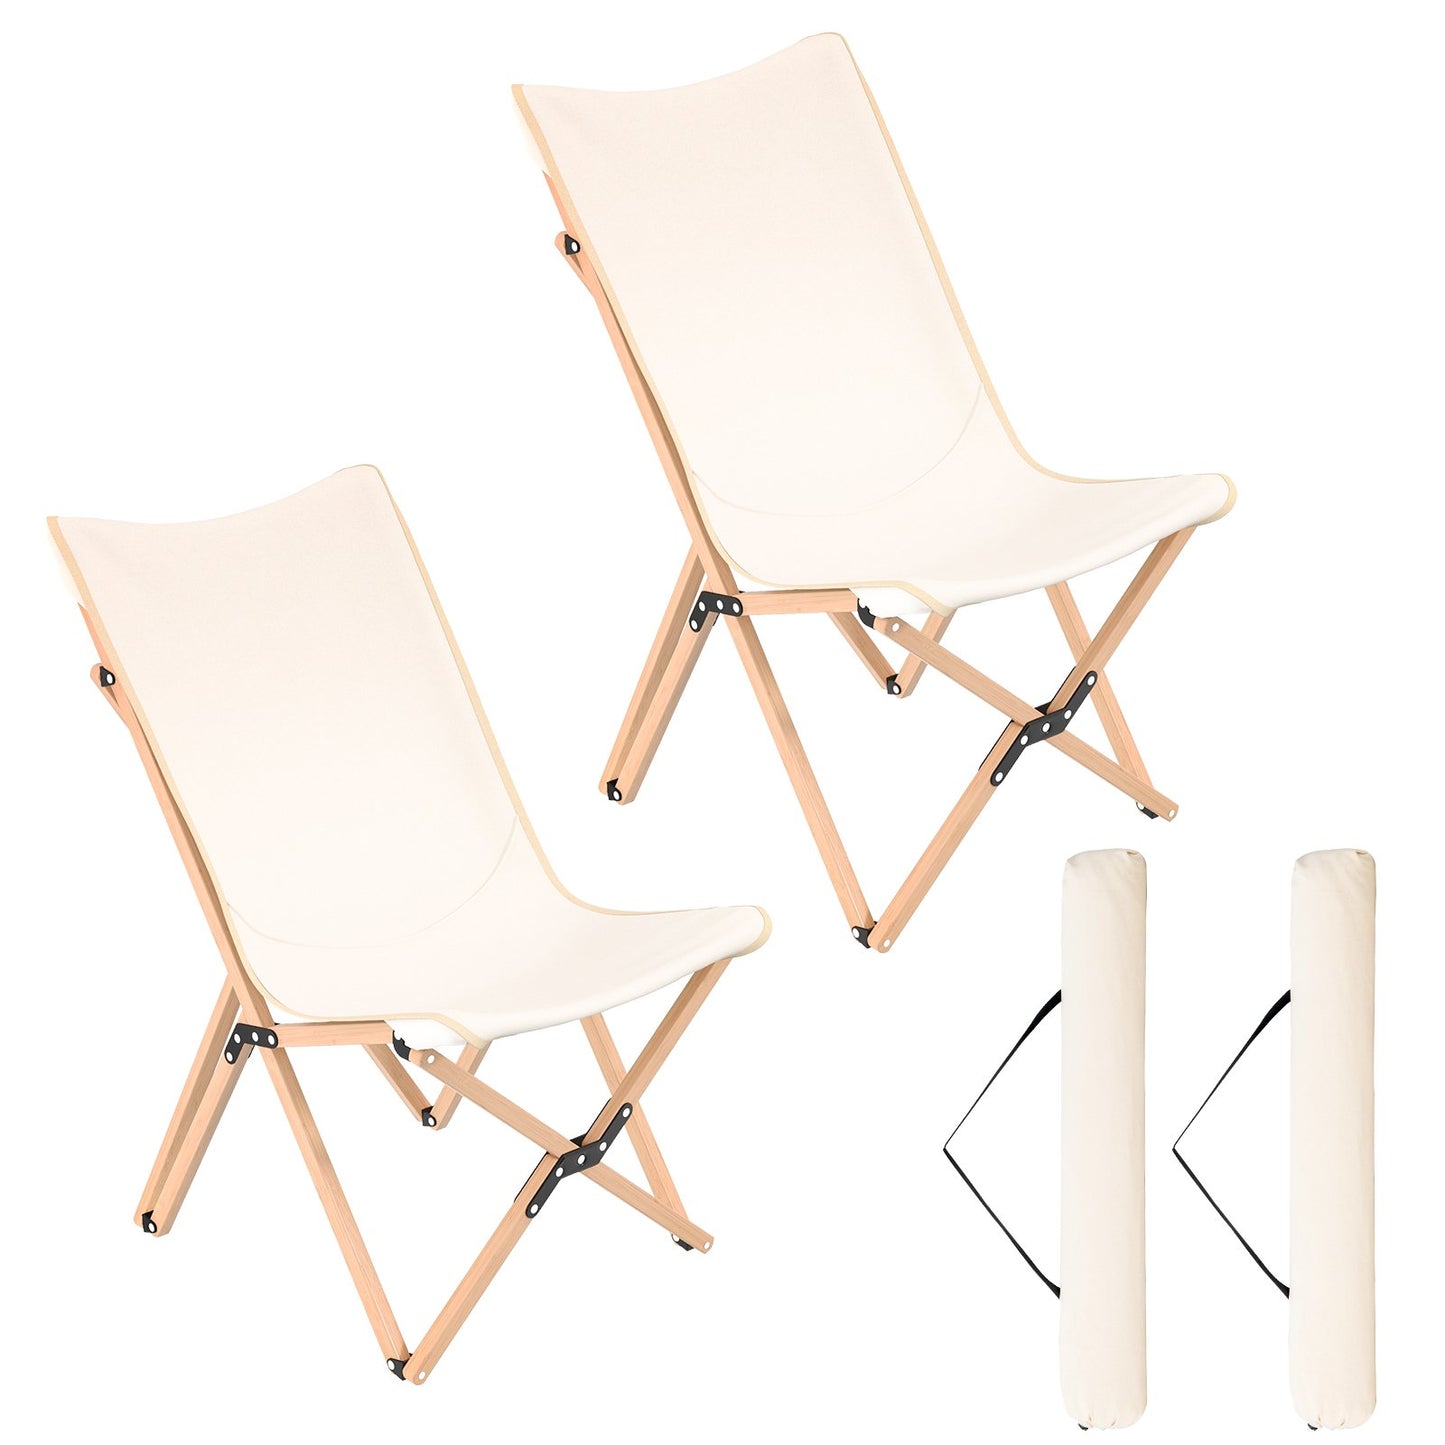 Set of 2 Bamboo Dorm Chair with Storage Pocket for Camping and Fishing, Beige